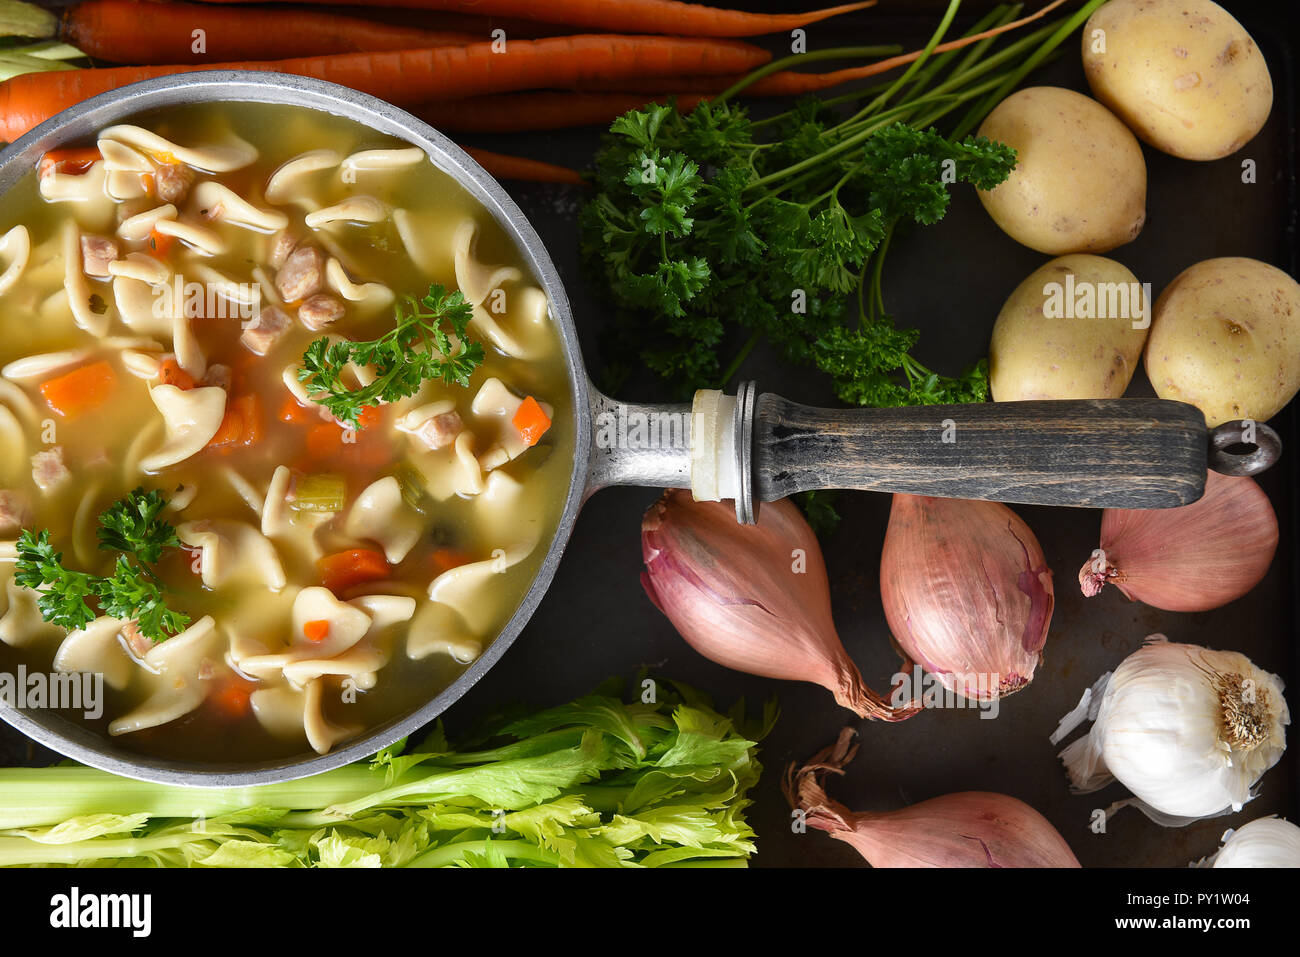 A pot of fresh homemade Chicken Noodle Soup surrounded by some of the ingredients. Stock Photo